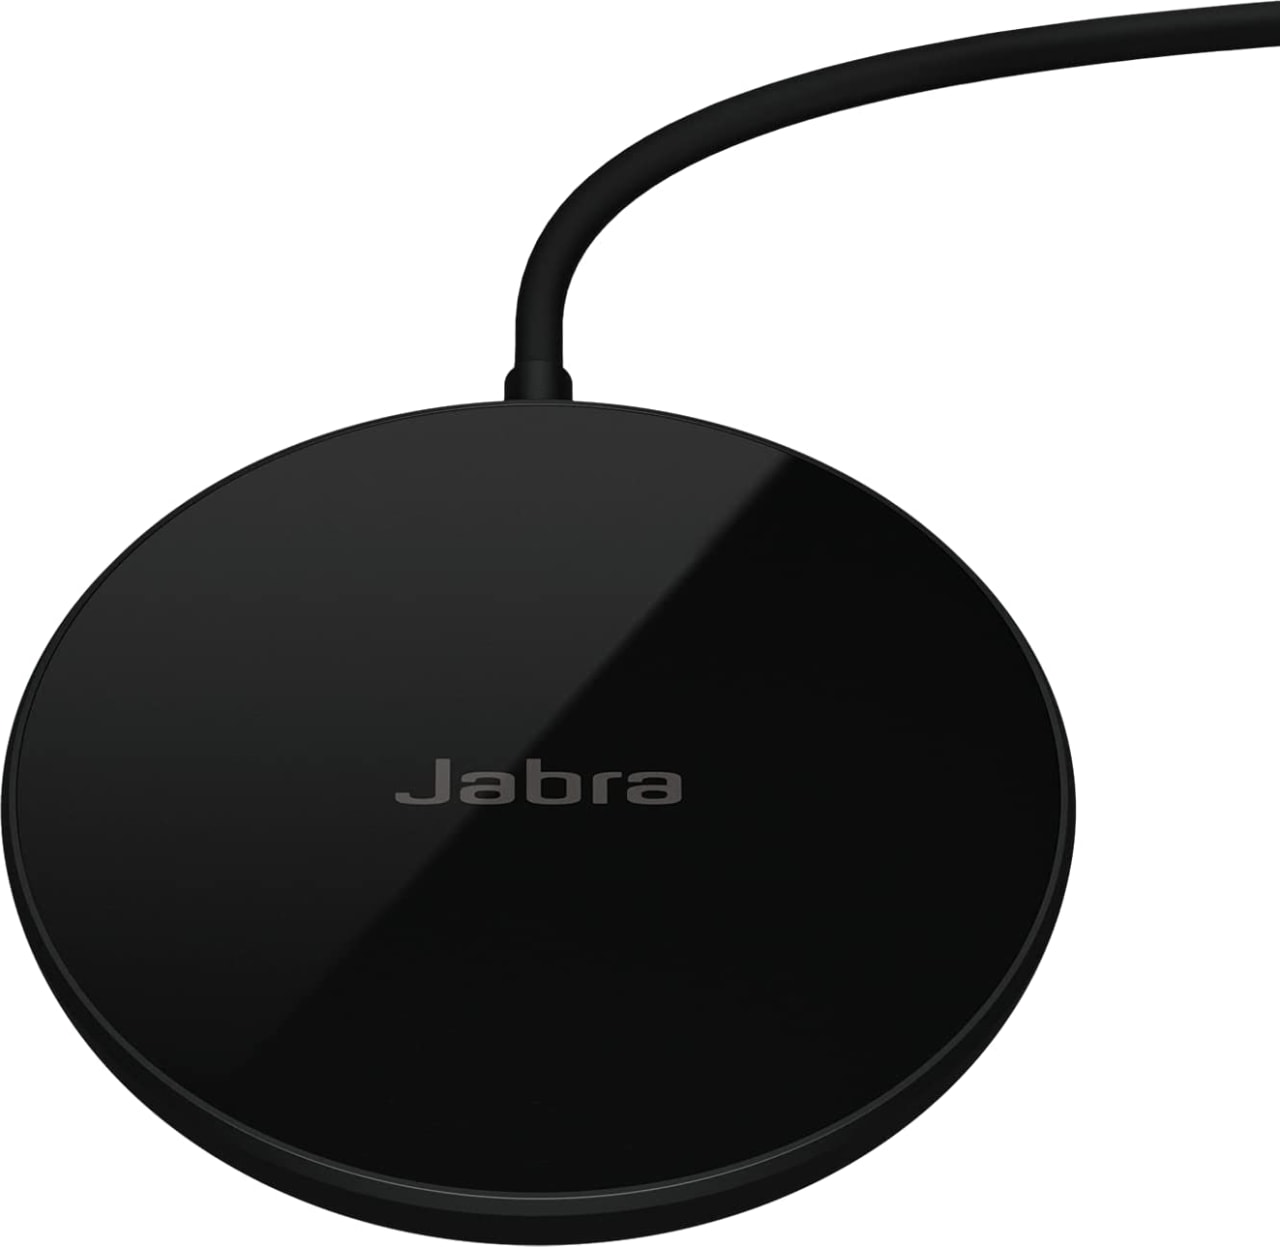 Titanium Black Jabra Elite 7 Pro Noise-cancelling In-ear Bluetooth Headphones (Including wireless charger) .5